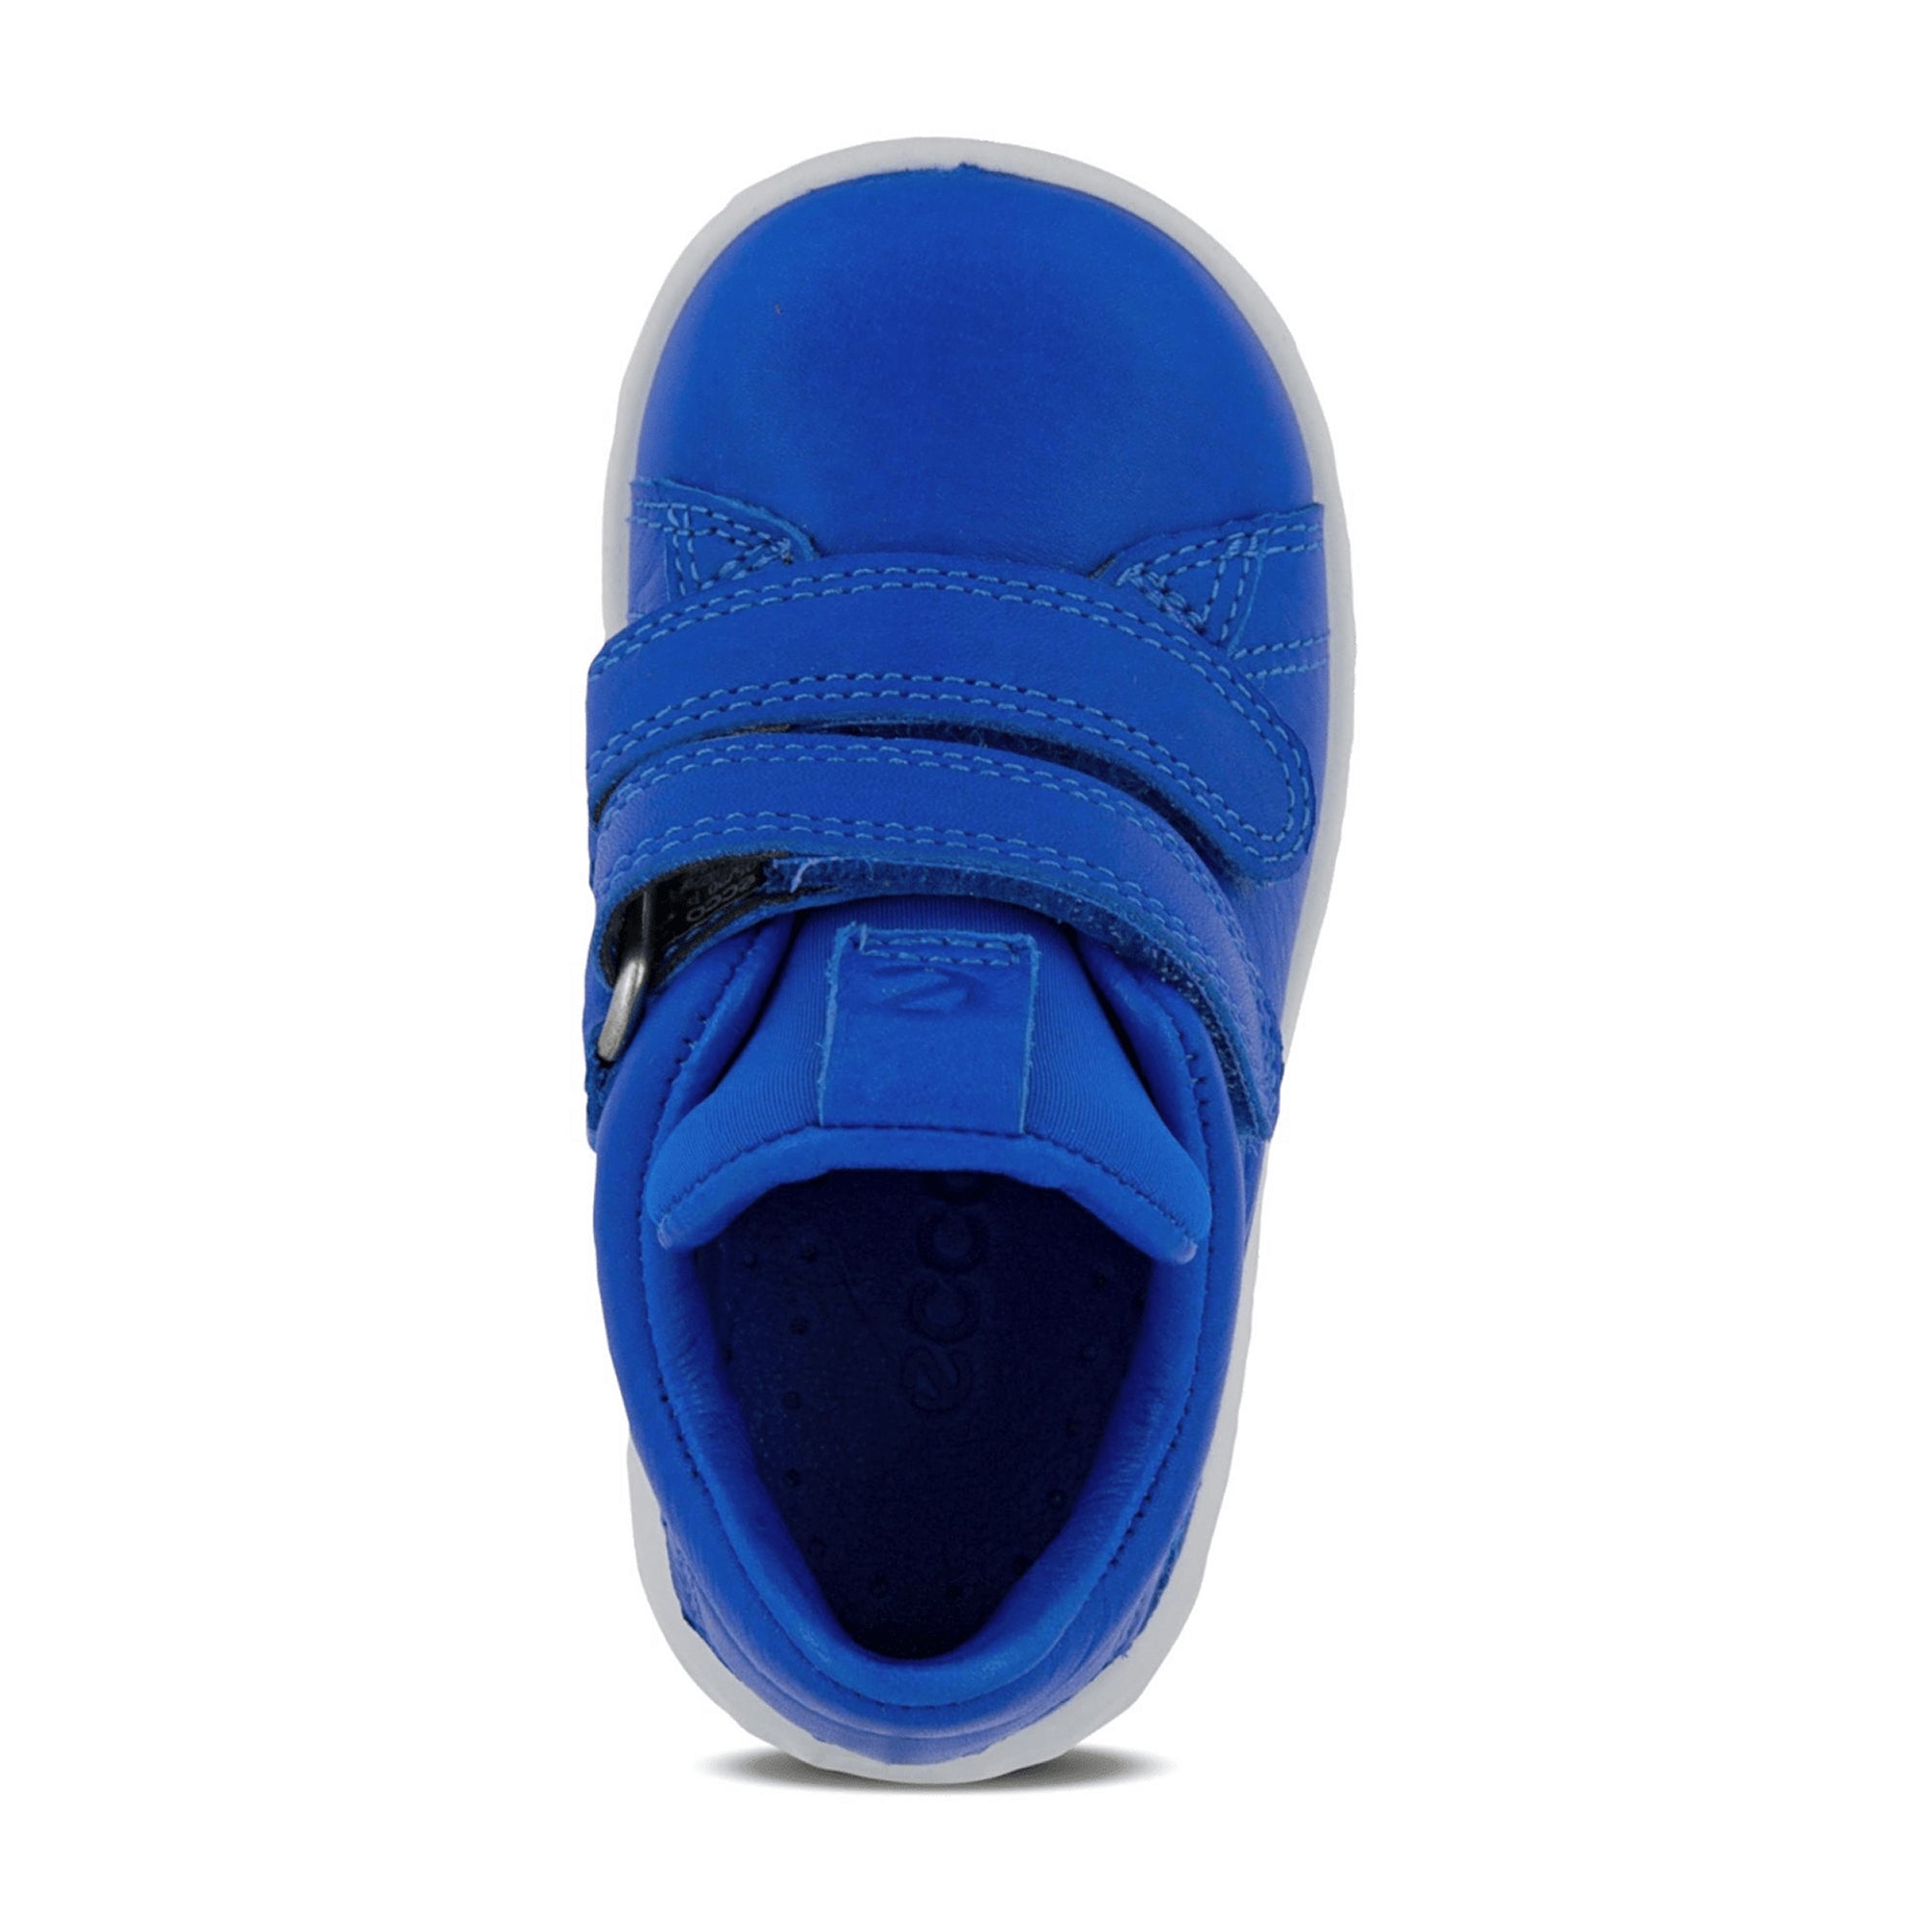 Ecco SP1 Lite In Kids Sneakers - Durable & Stylish Blue Shoes